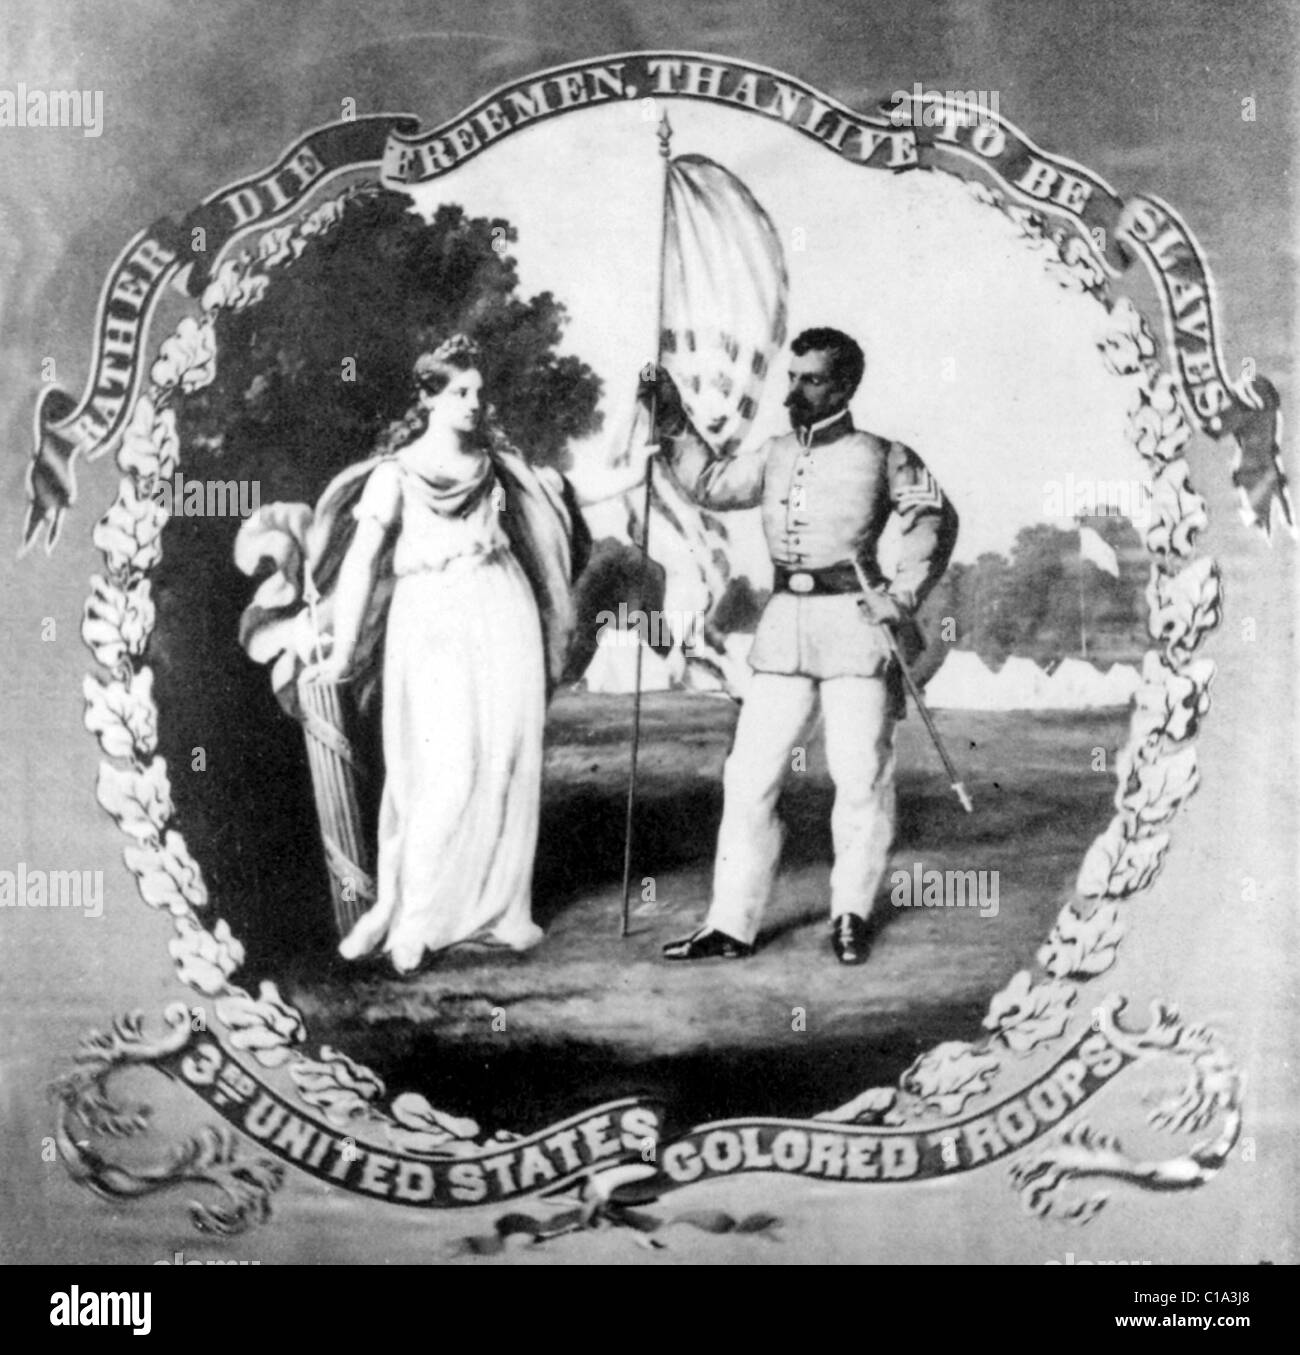 Regimental flag depicting African American soldier and Columbia holding an American flag between them. Stock Photo